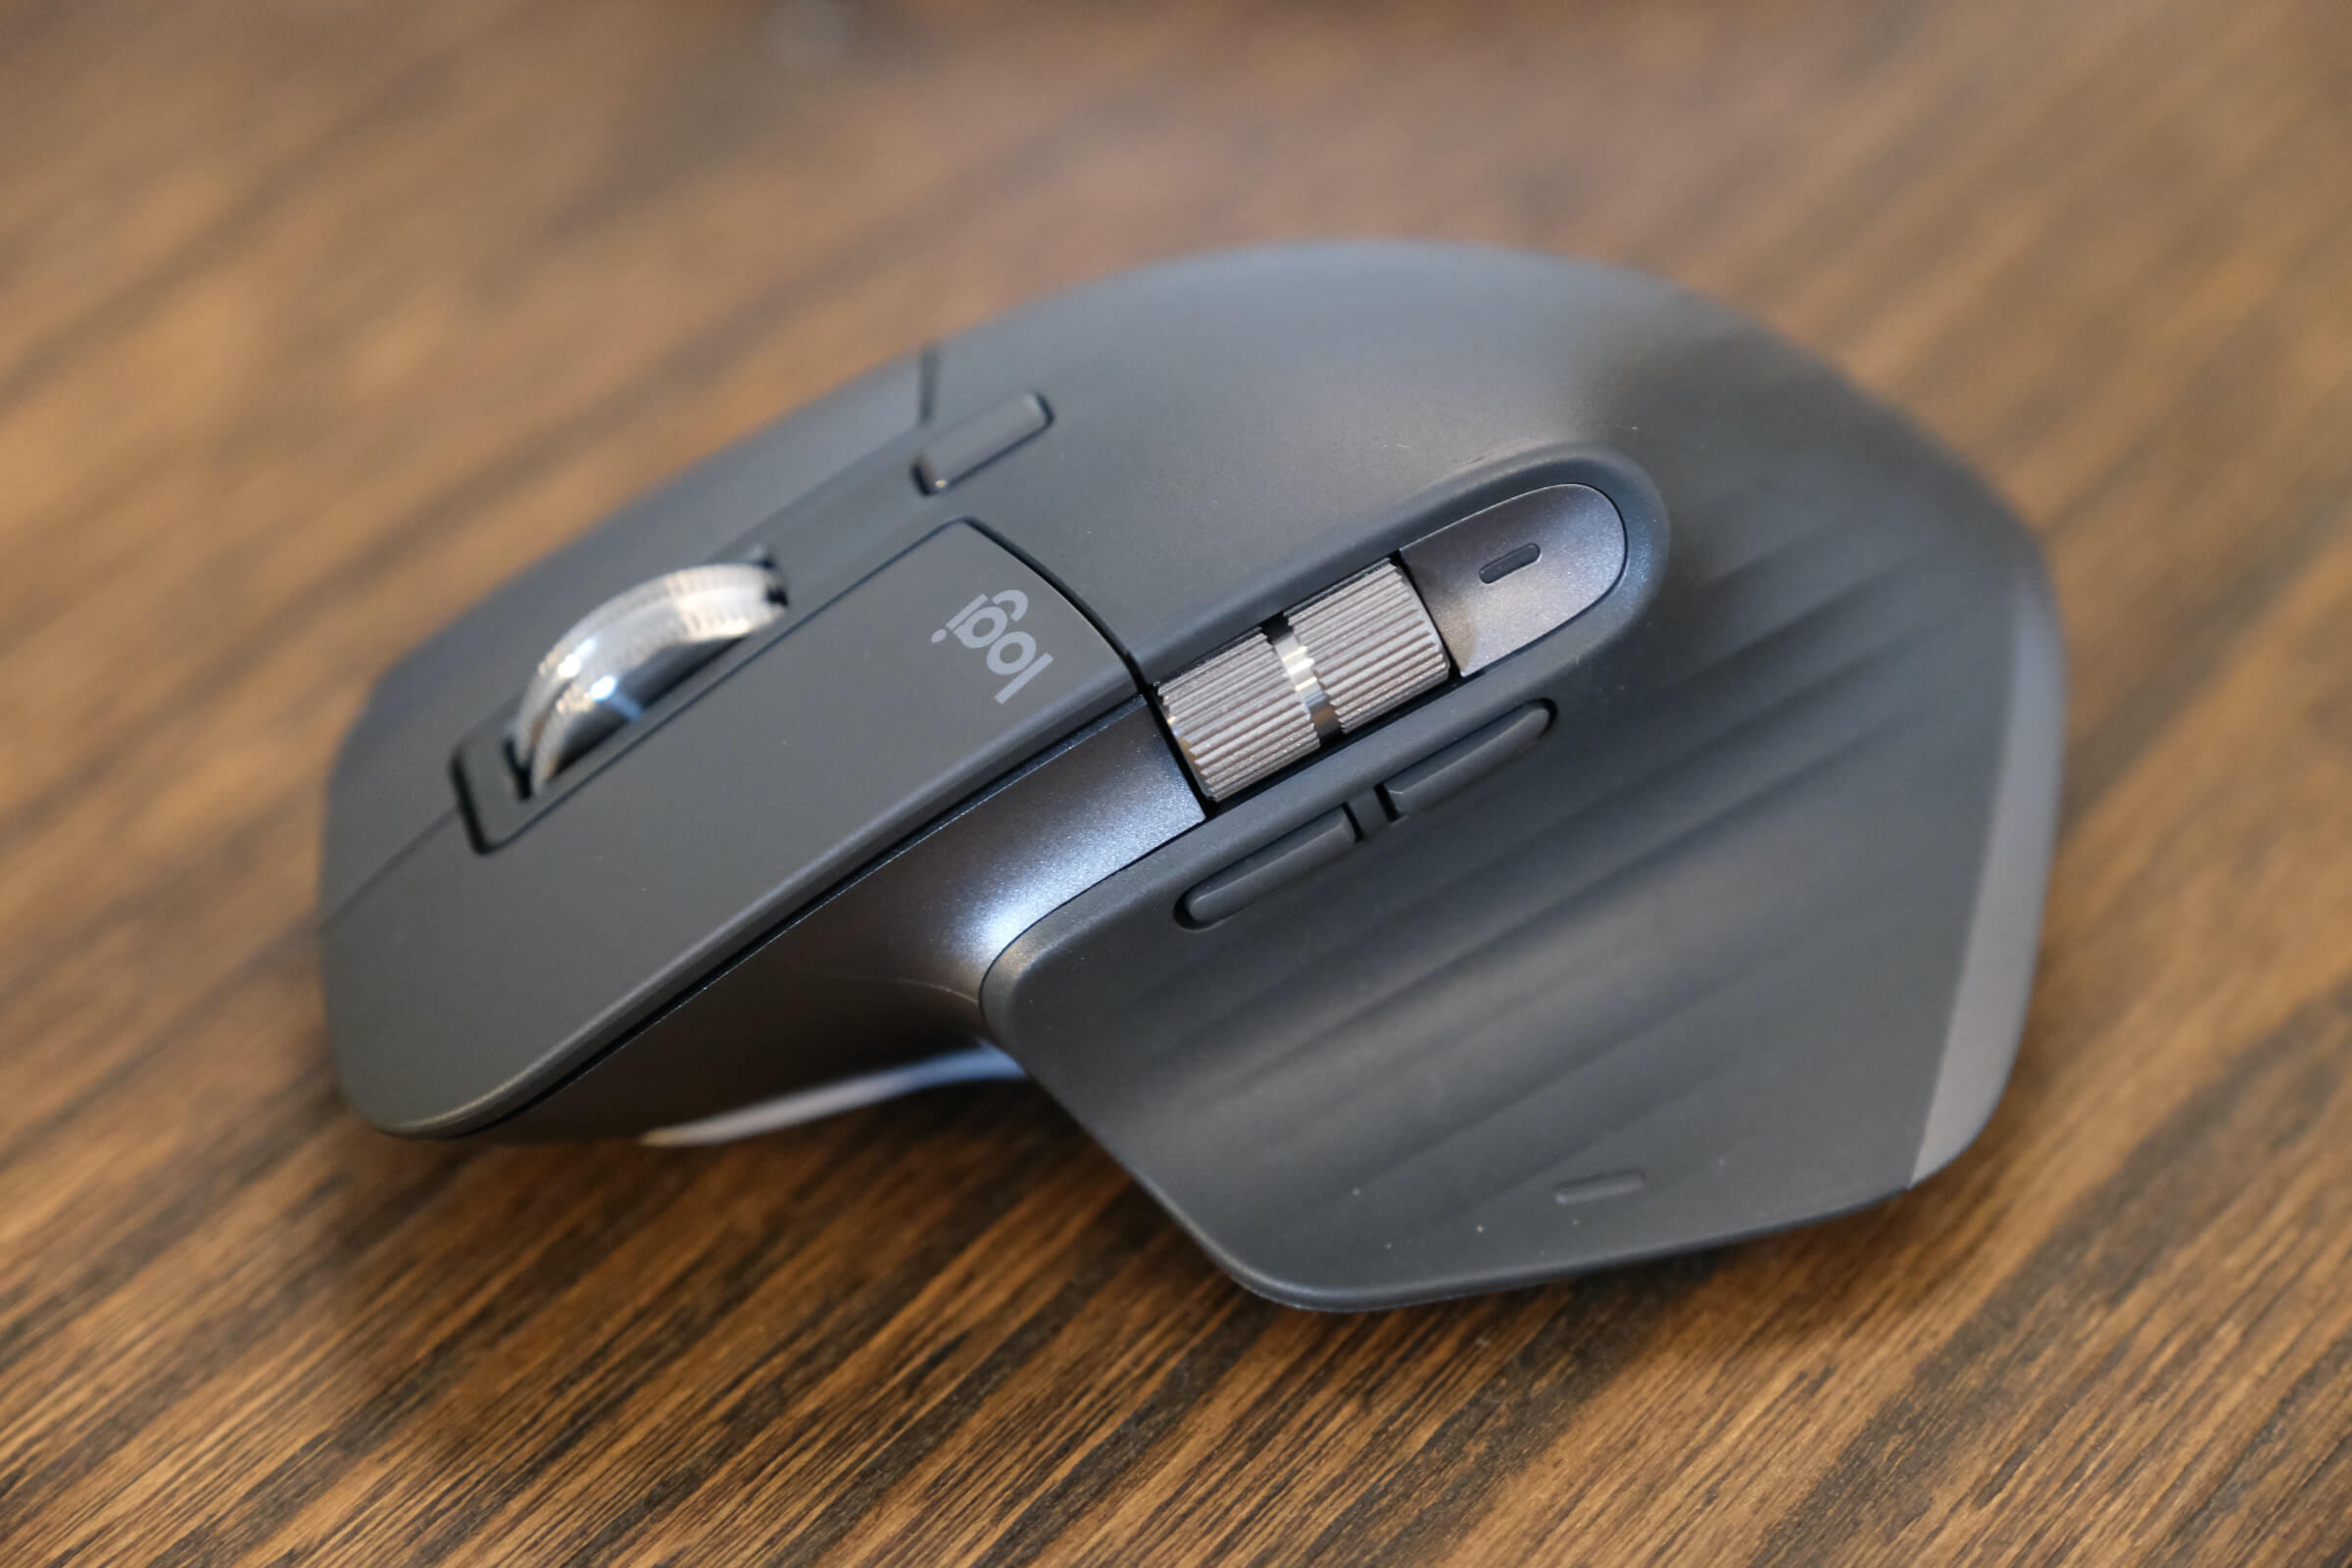 Logitech MX Master 3 Vs MX Anywhere 2S: Which is Better For You?